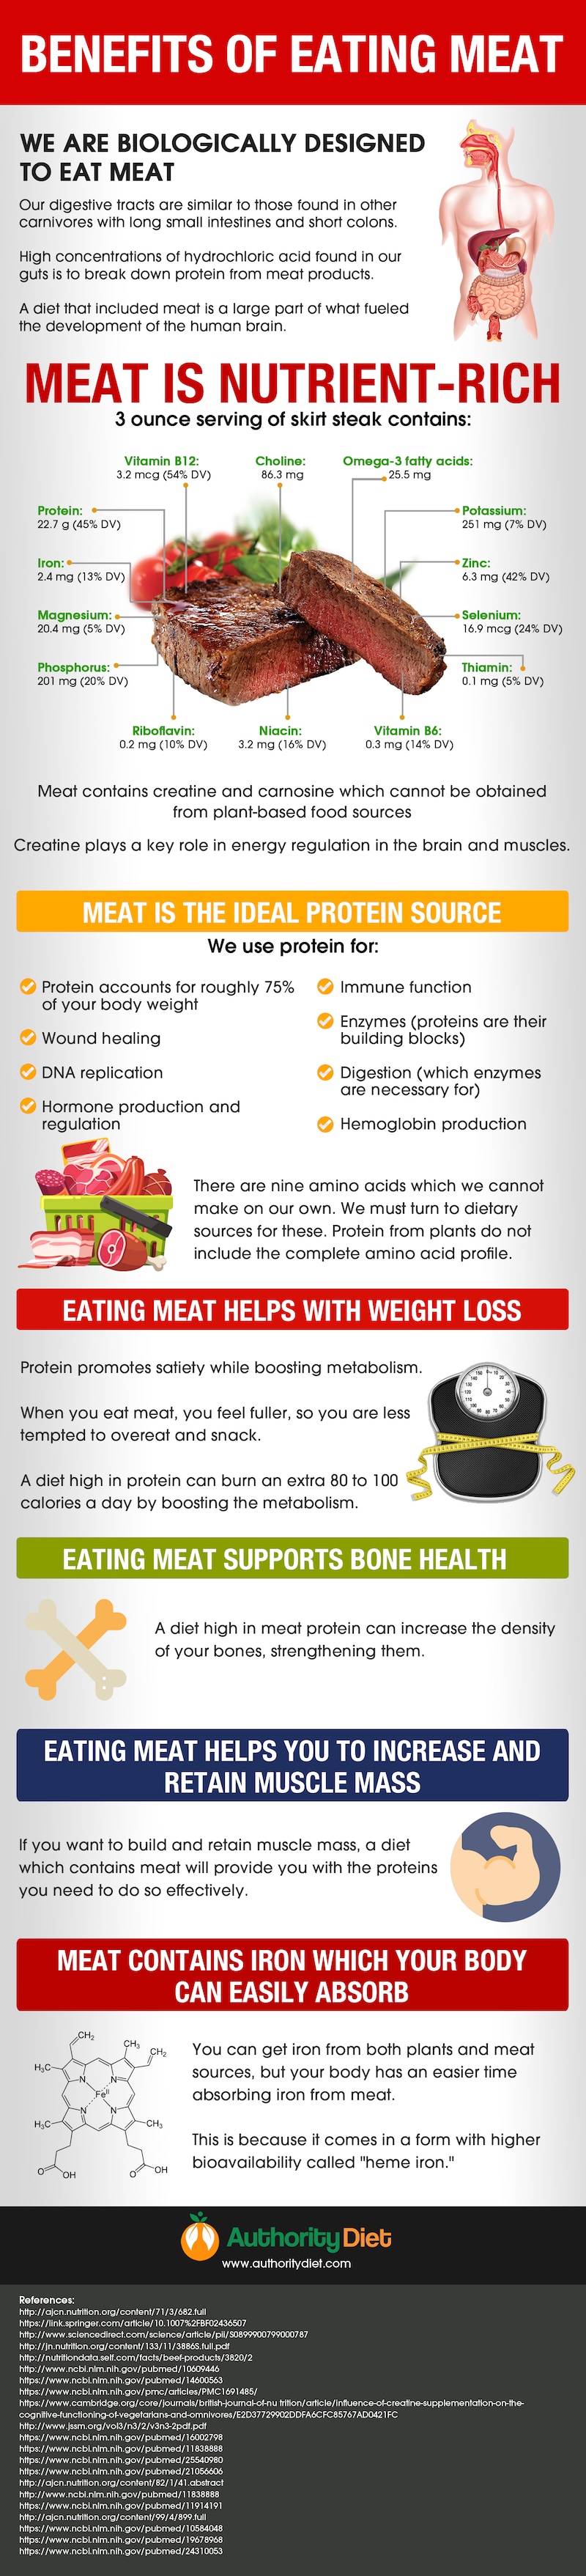 Health Benefits of Eating Meat